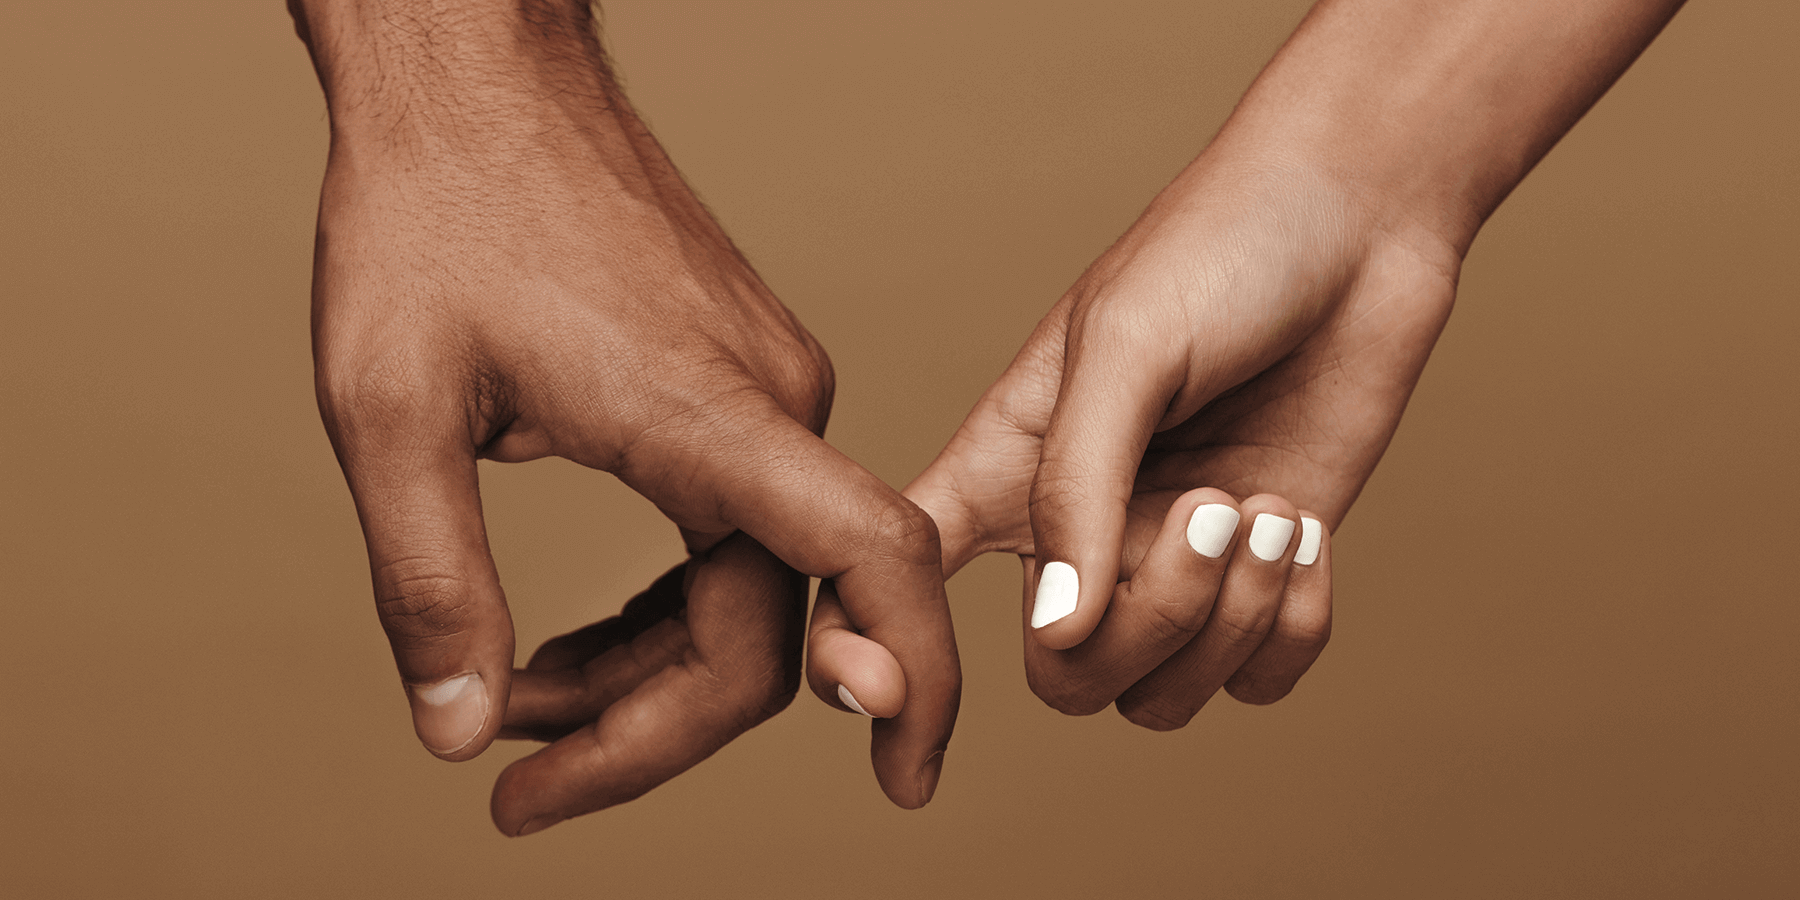 Couple holding hands and breaking stigma of living with an STD